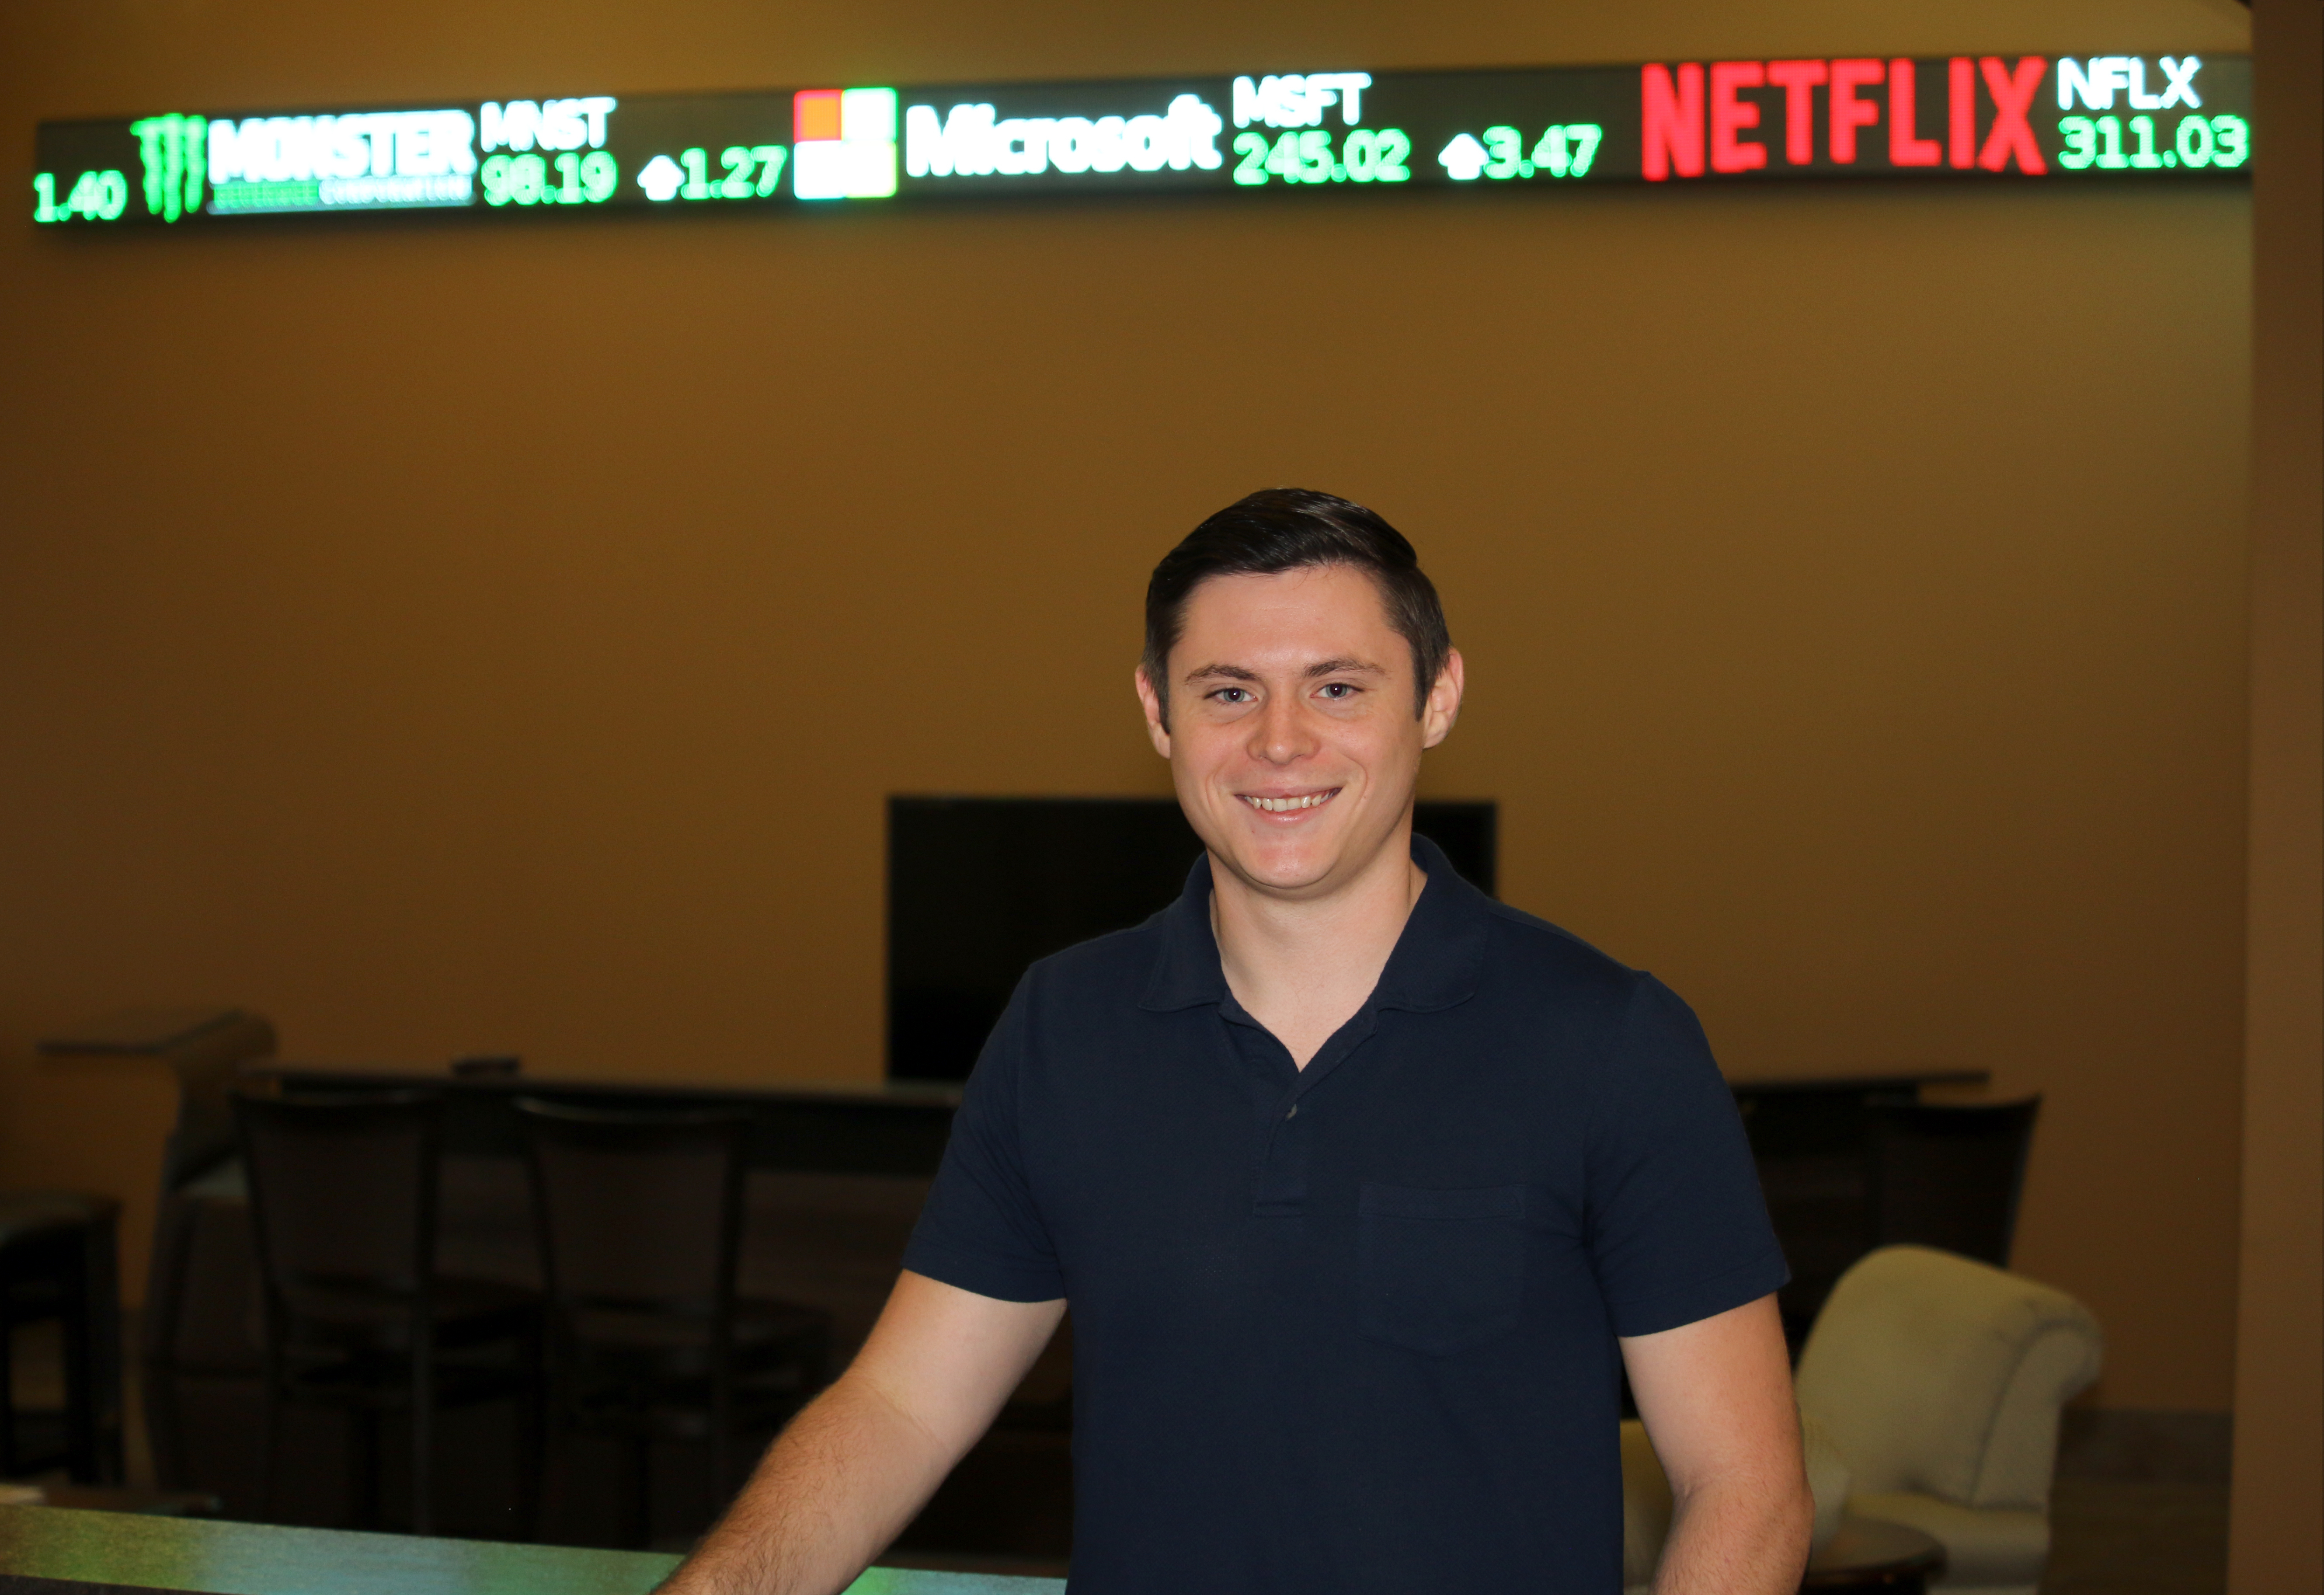 young white male stands in front of a stock ticker